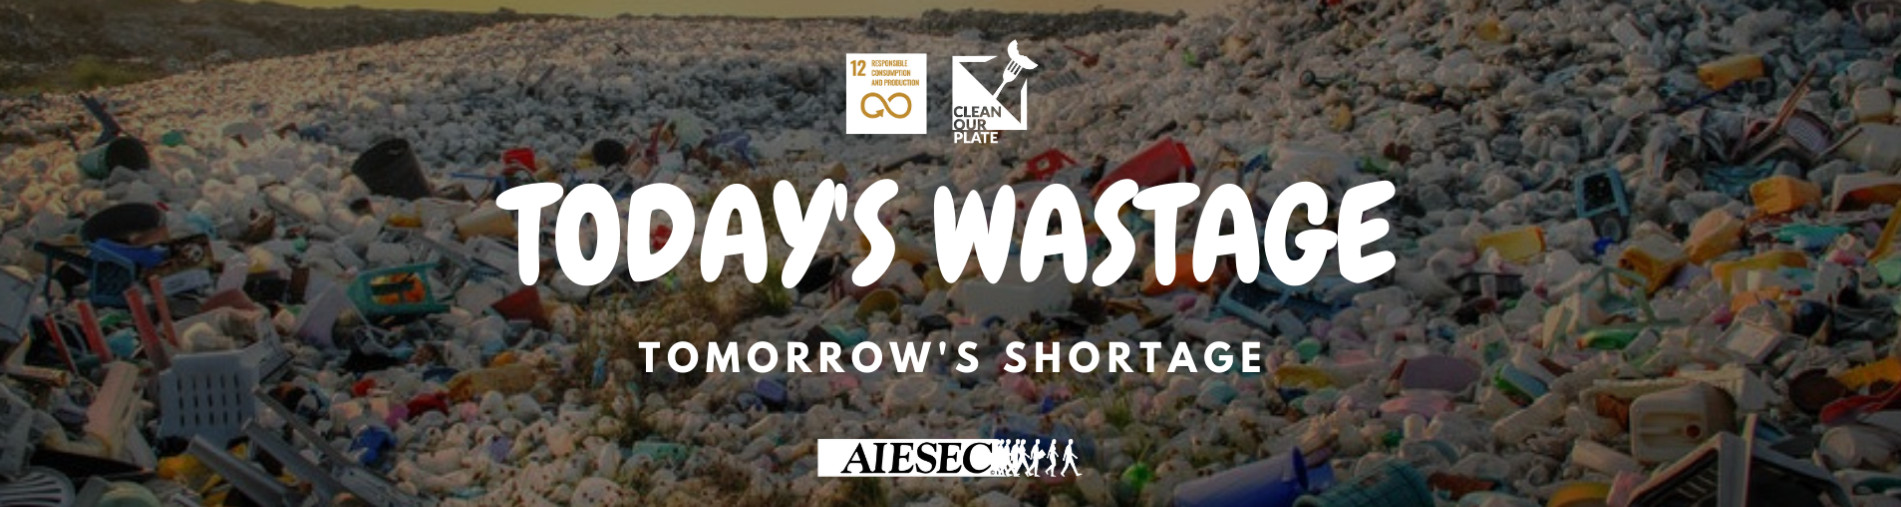 Today's Wastage is Tomorrow's Shortage